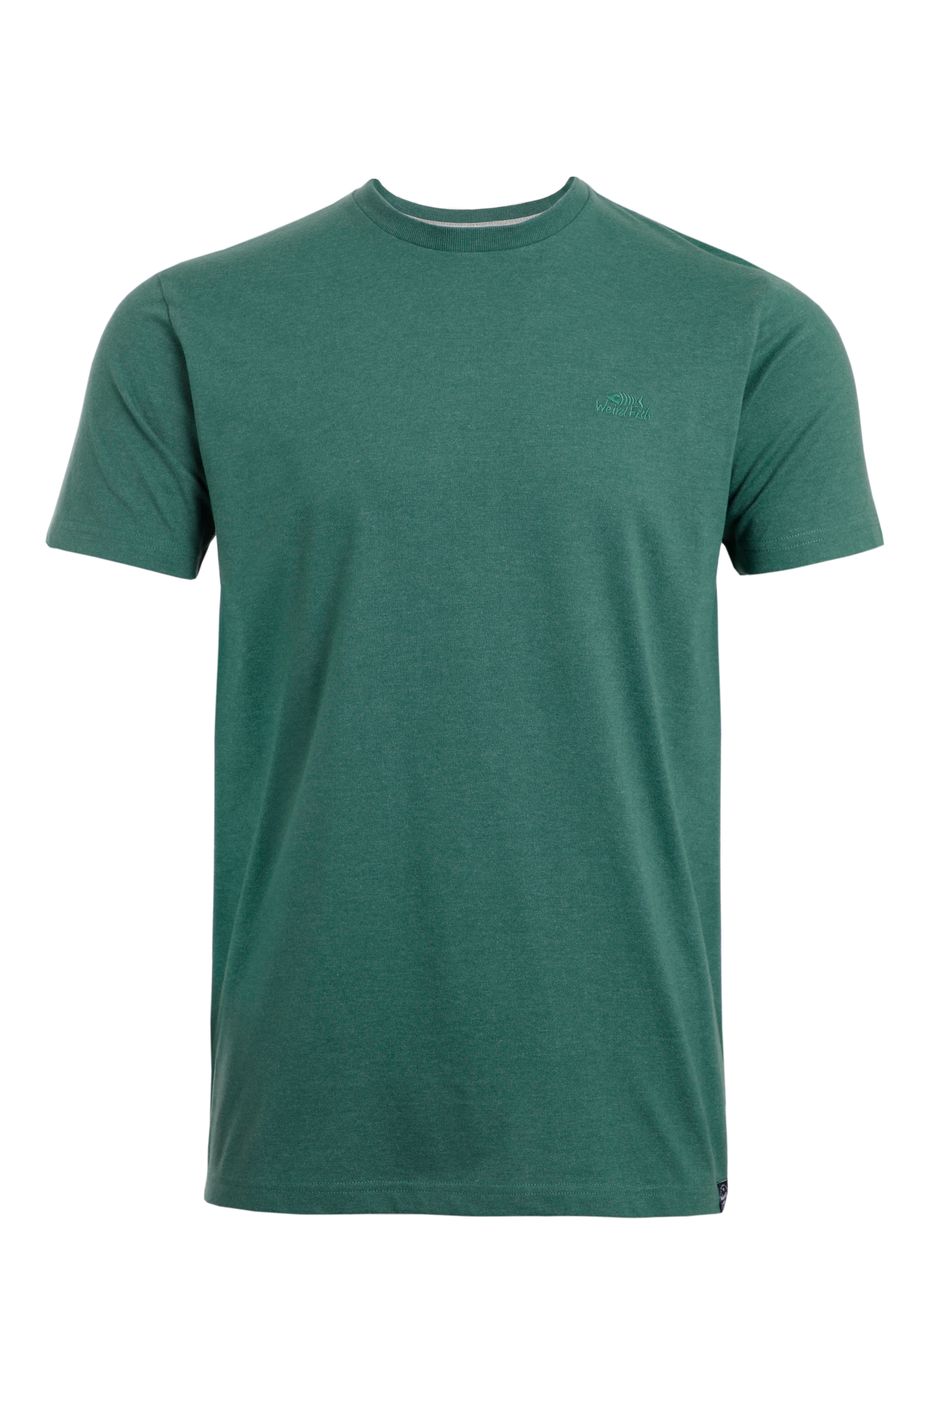 Fished T-Shirt Forest Green